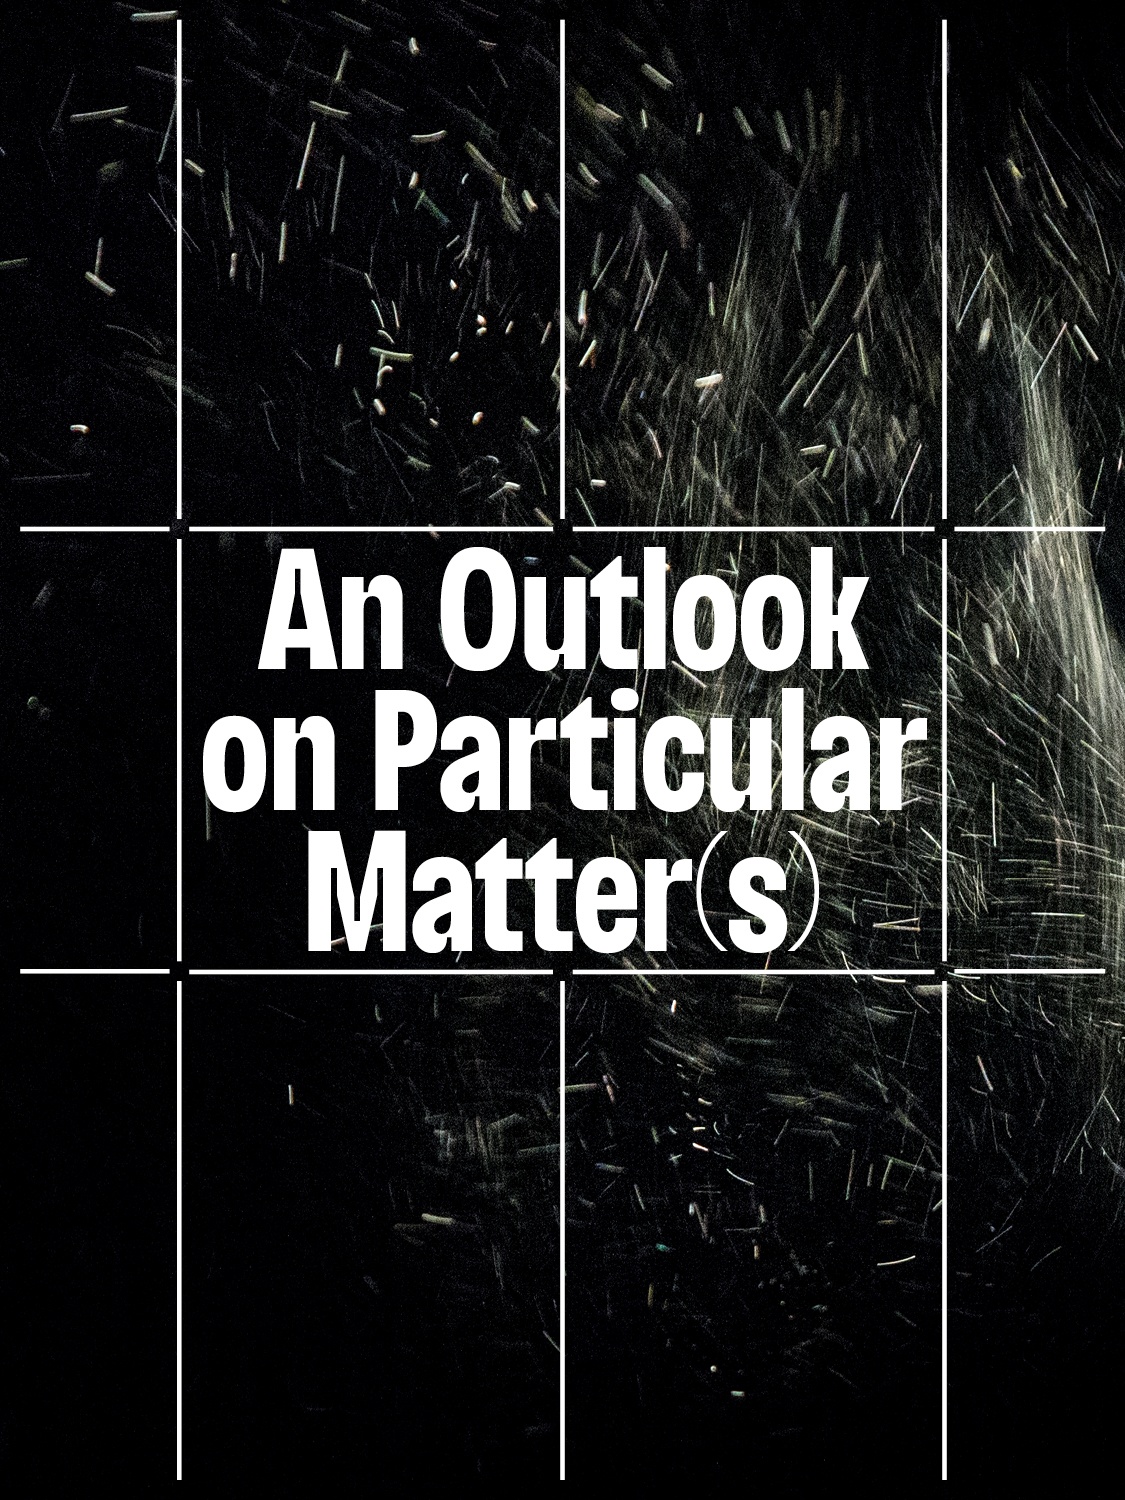 Illuminated specks of dust whizz through the air in a darkened gallery. Overlaid on the image is the program title "An Outlook on Particular Matters".